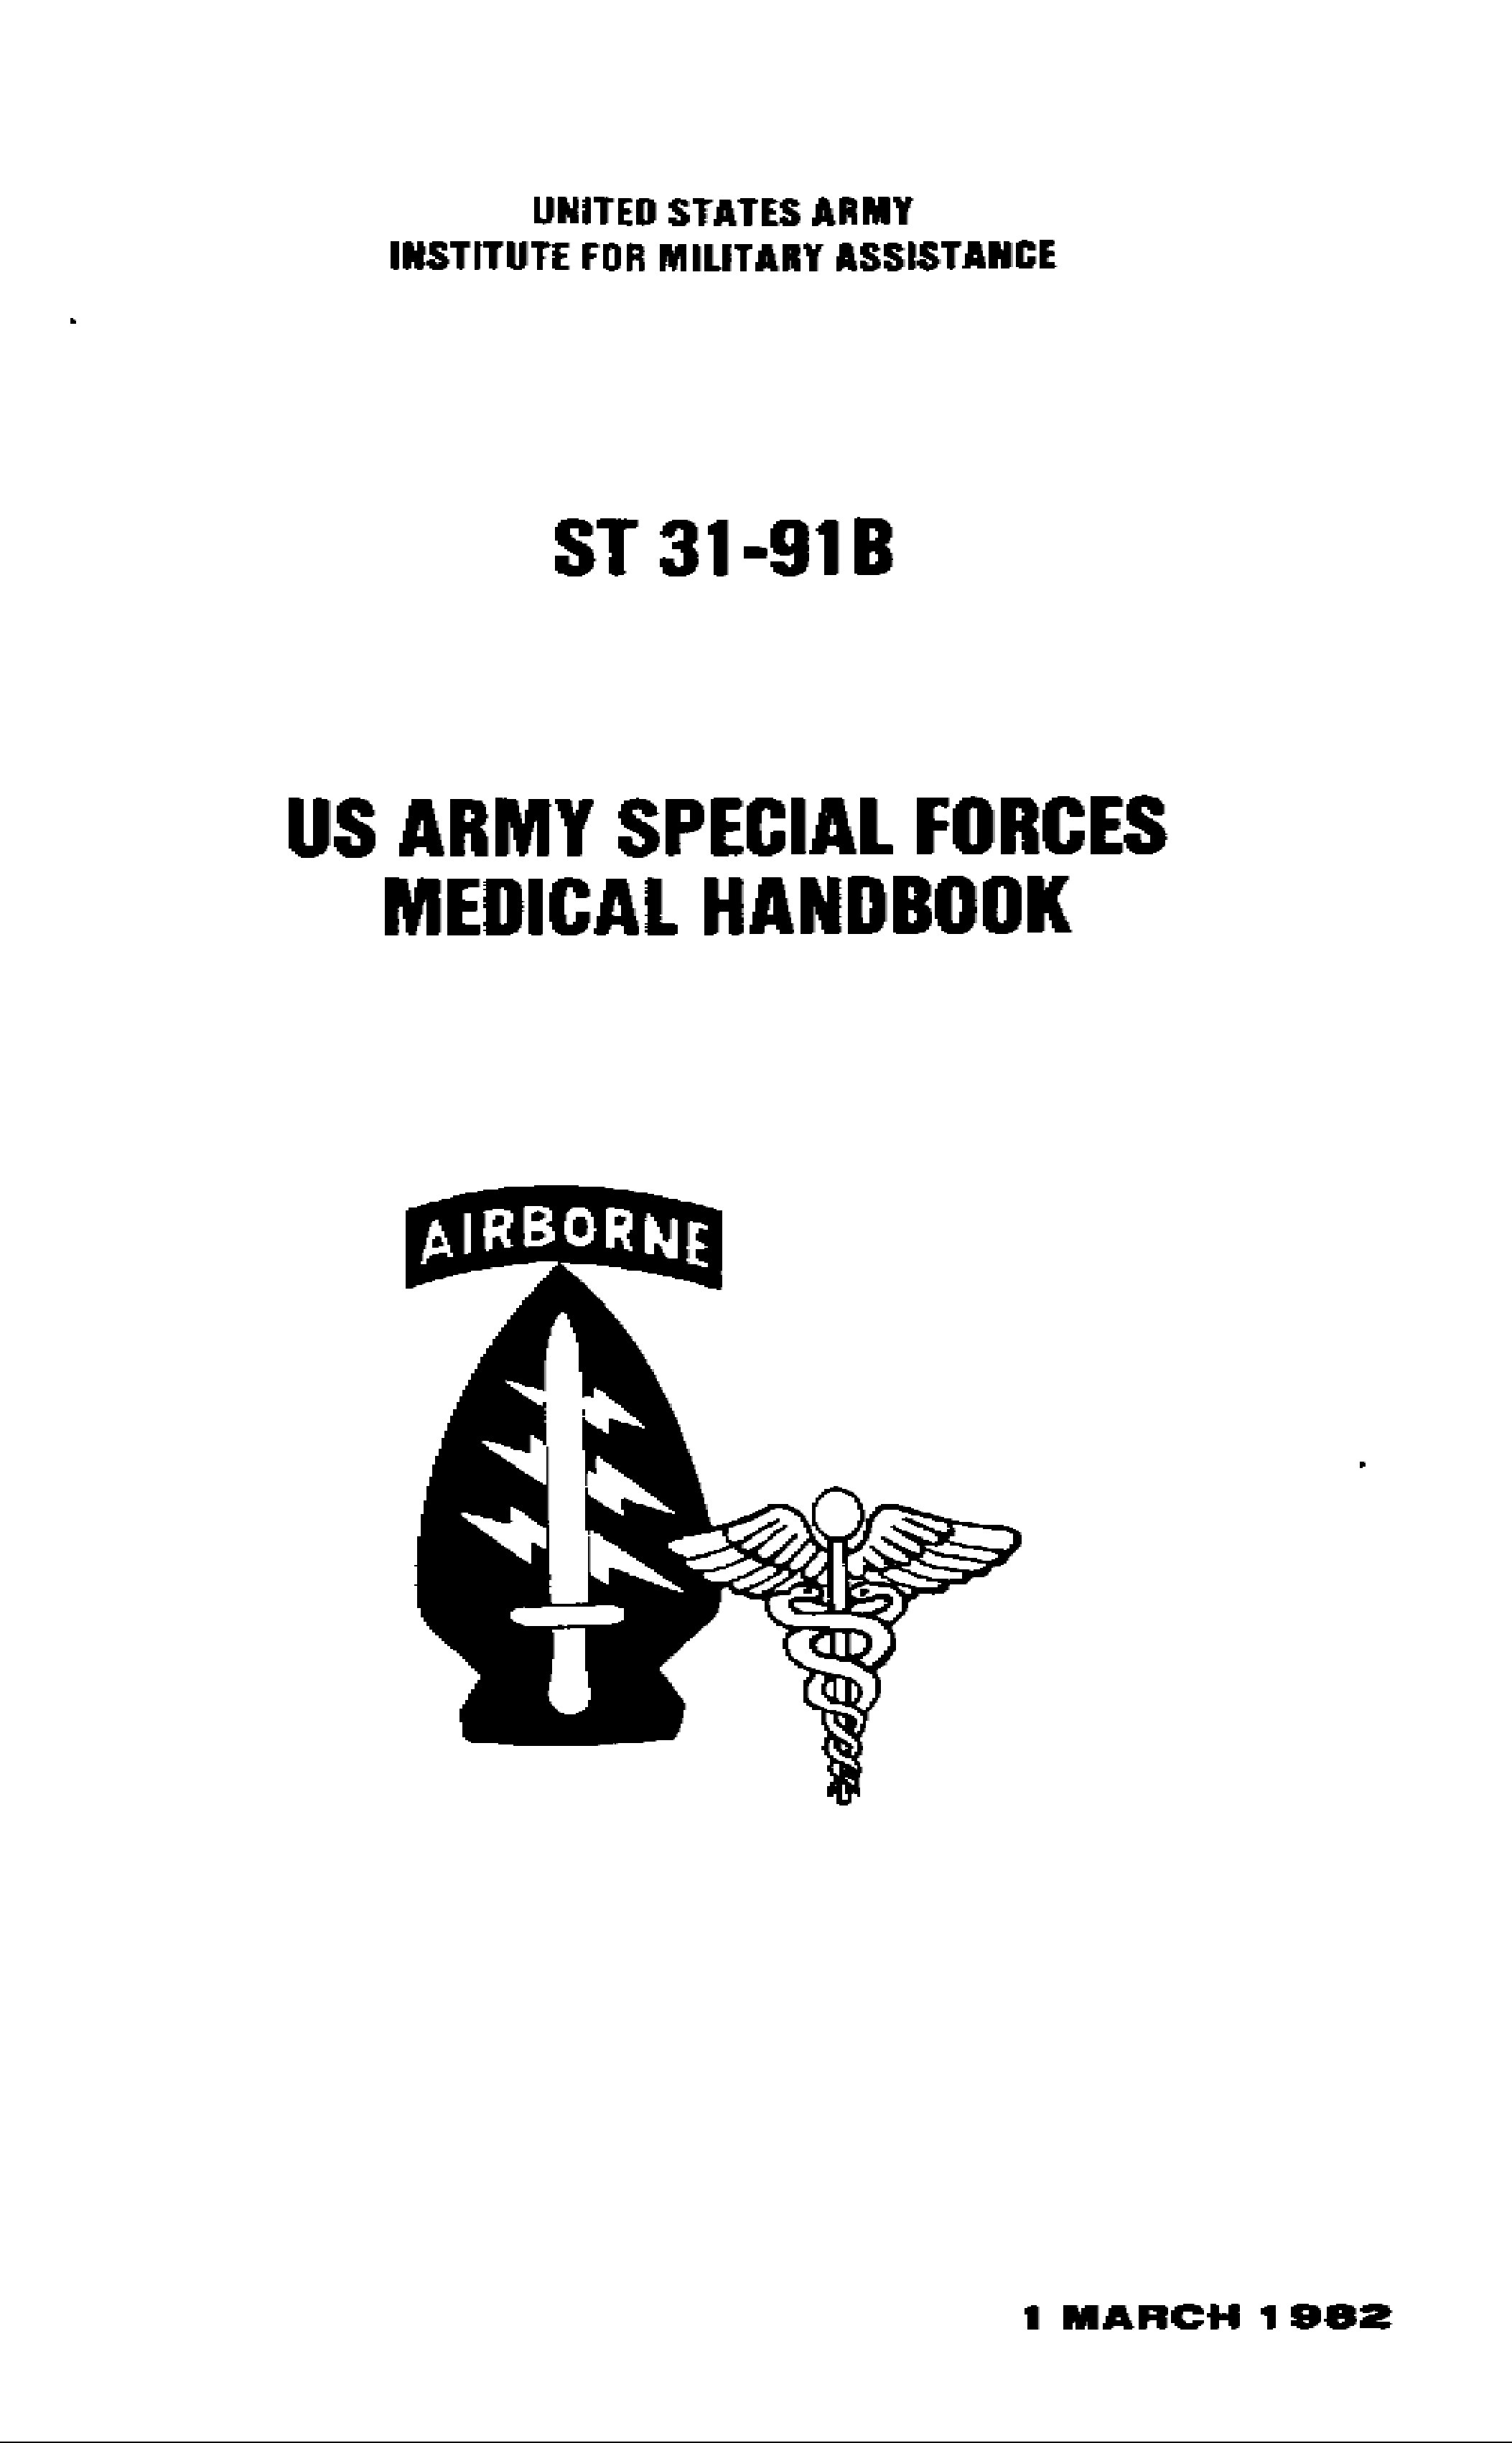 ST 31-91B Special Forces Medical Handbook